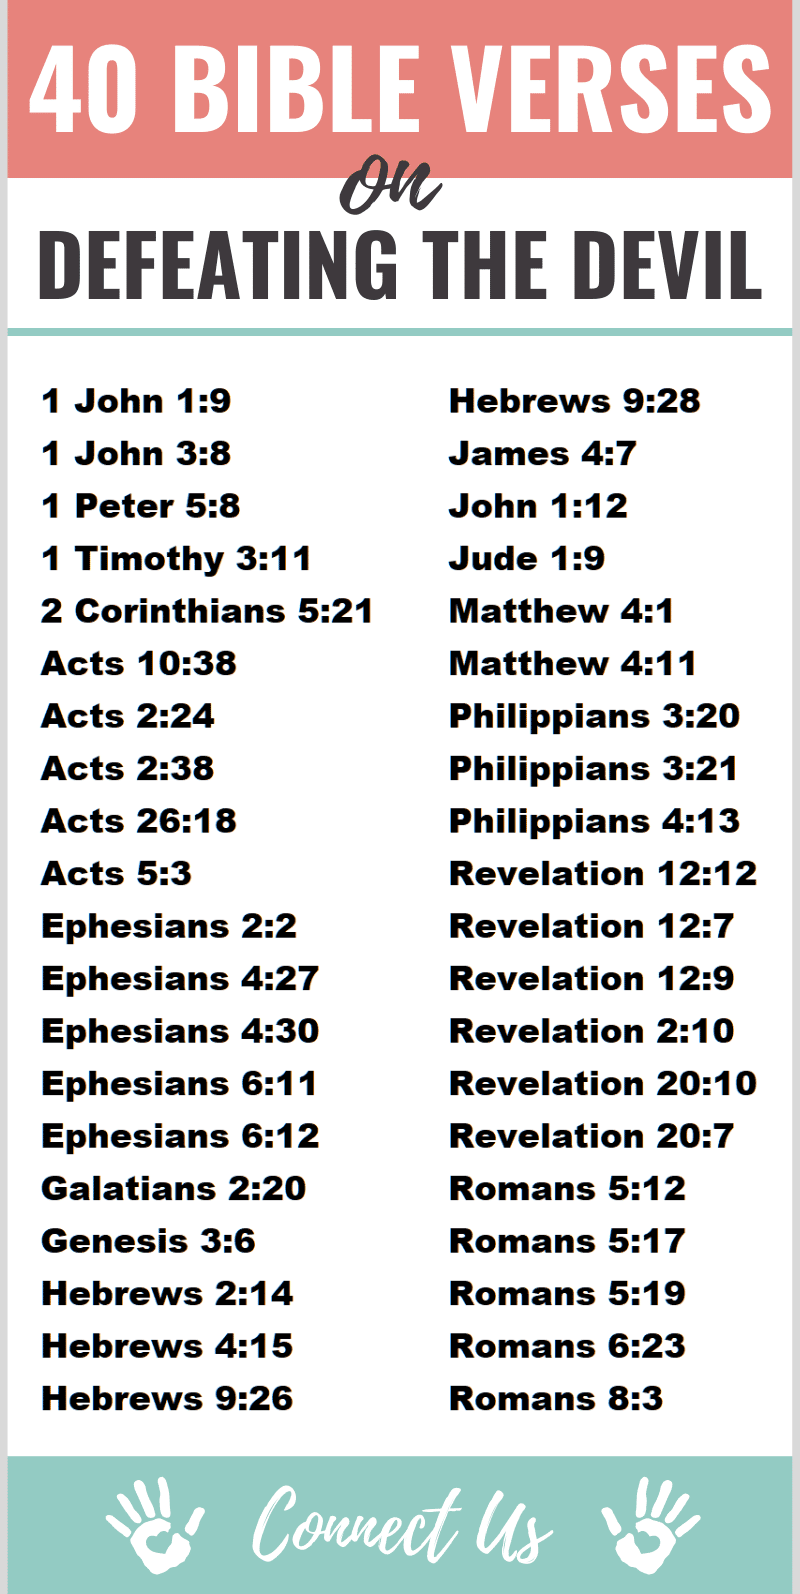 Bible Verses on Defeating the Devil